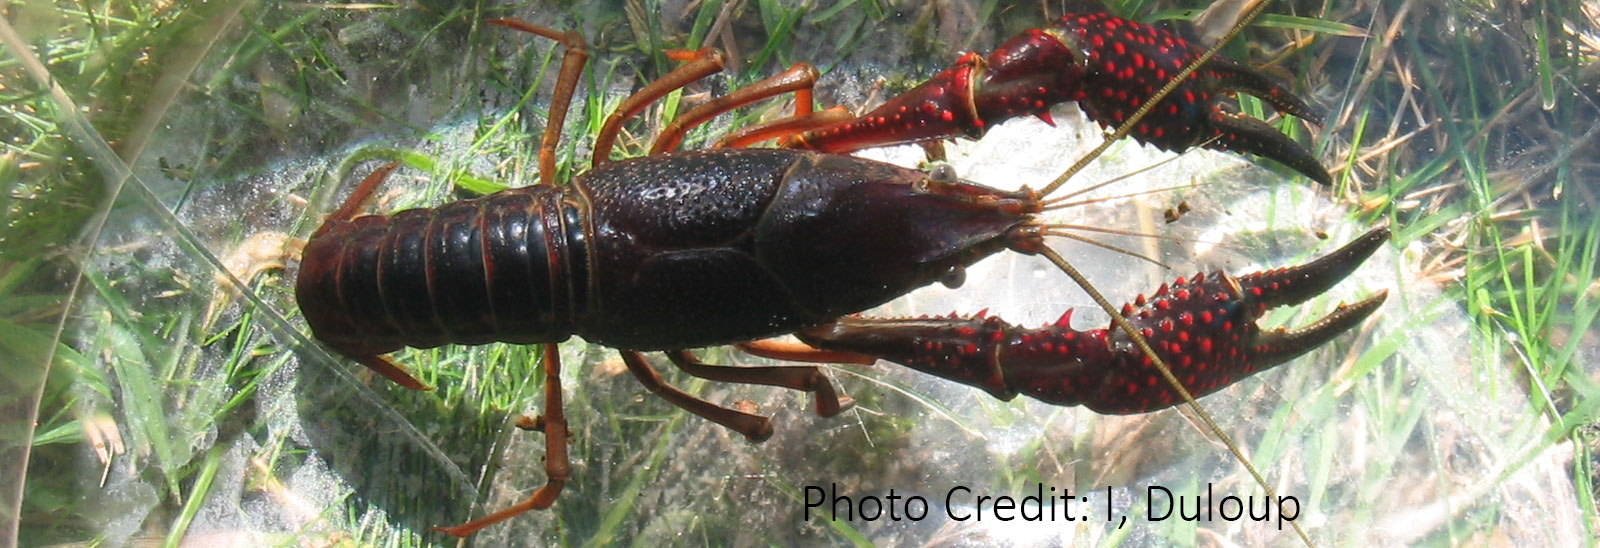 Red swamp crayfish - By I, Duloup, CC BY-SA 3.0, https://commons.wikimedia.org/w/index.php?curid=2255402